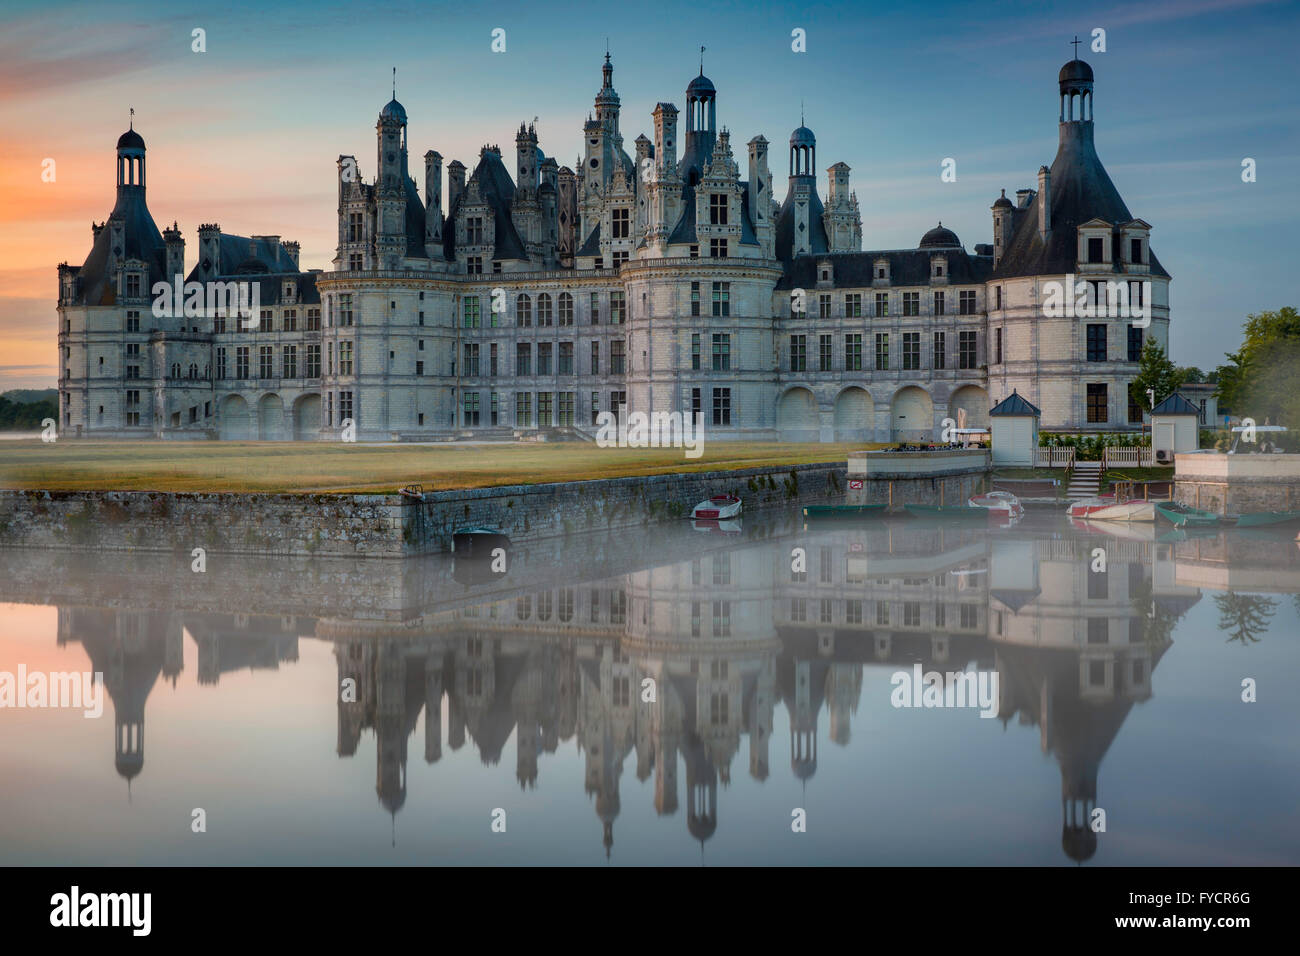 Early morning over Chateau de Chambord, Loire-et-Cher, Centre, France Stock Photo